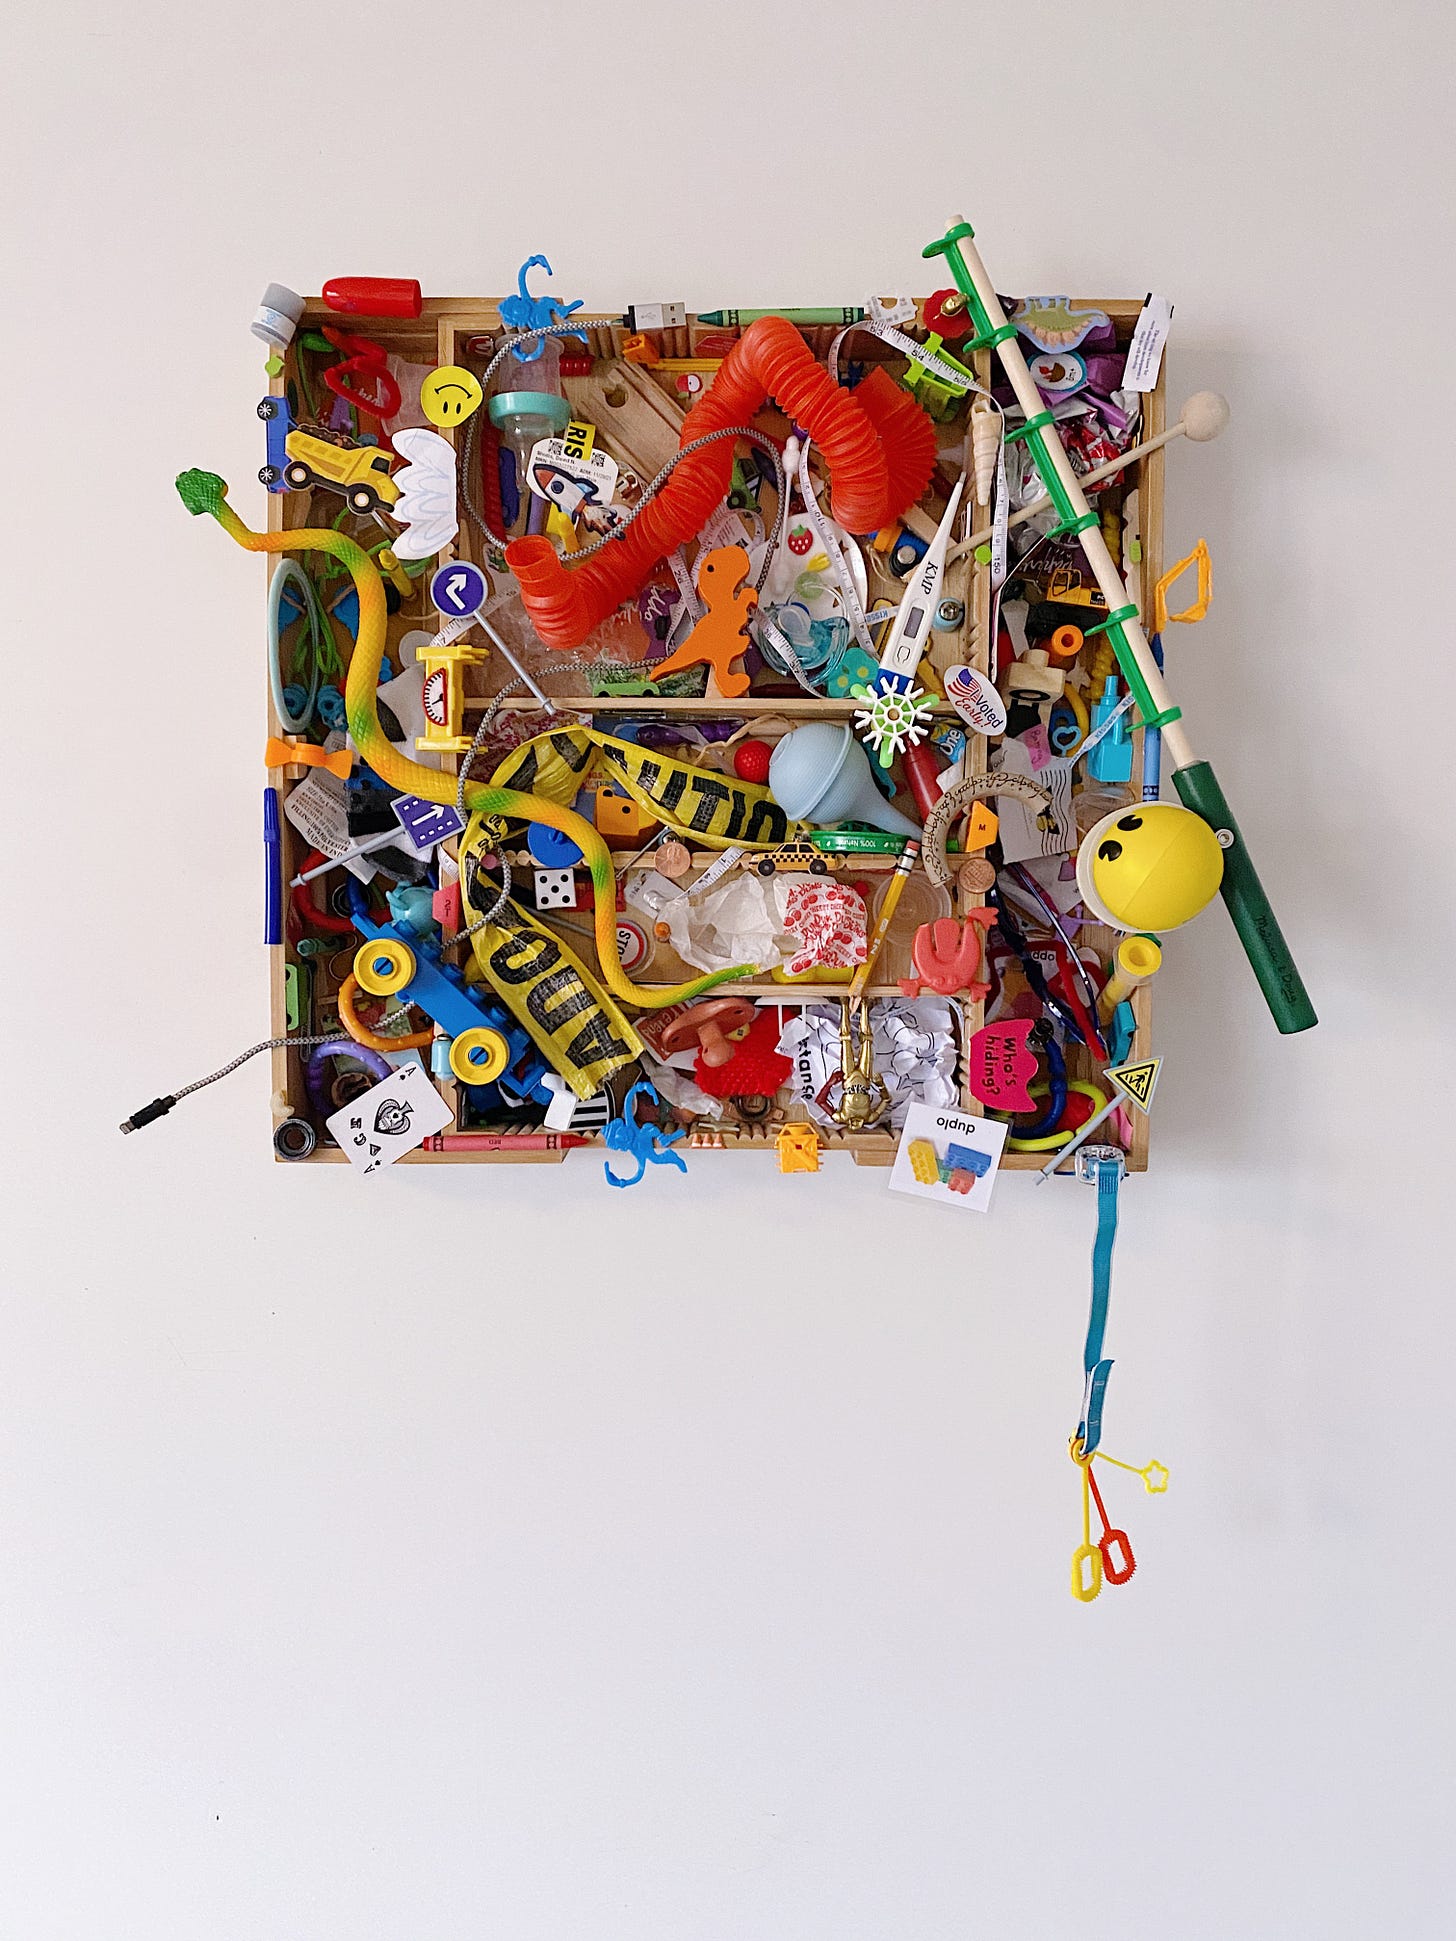 Broken toys and detritus are glued to a bamboo silverware tray. Items include: plastic snake, pop tube, caution tape, barrel of monkeys, smiley face sticker, dum dums wrapper, I voted sticker, children's fishing pole, crayons, broken cars, and more.